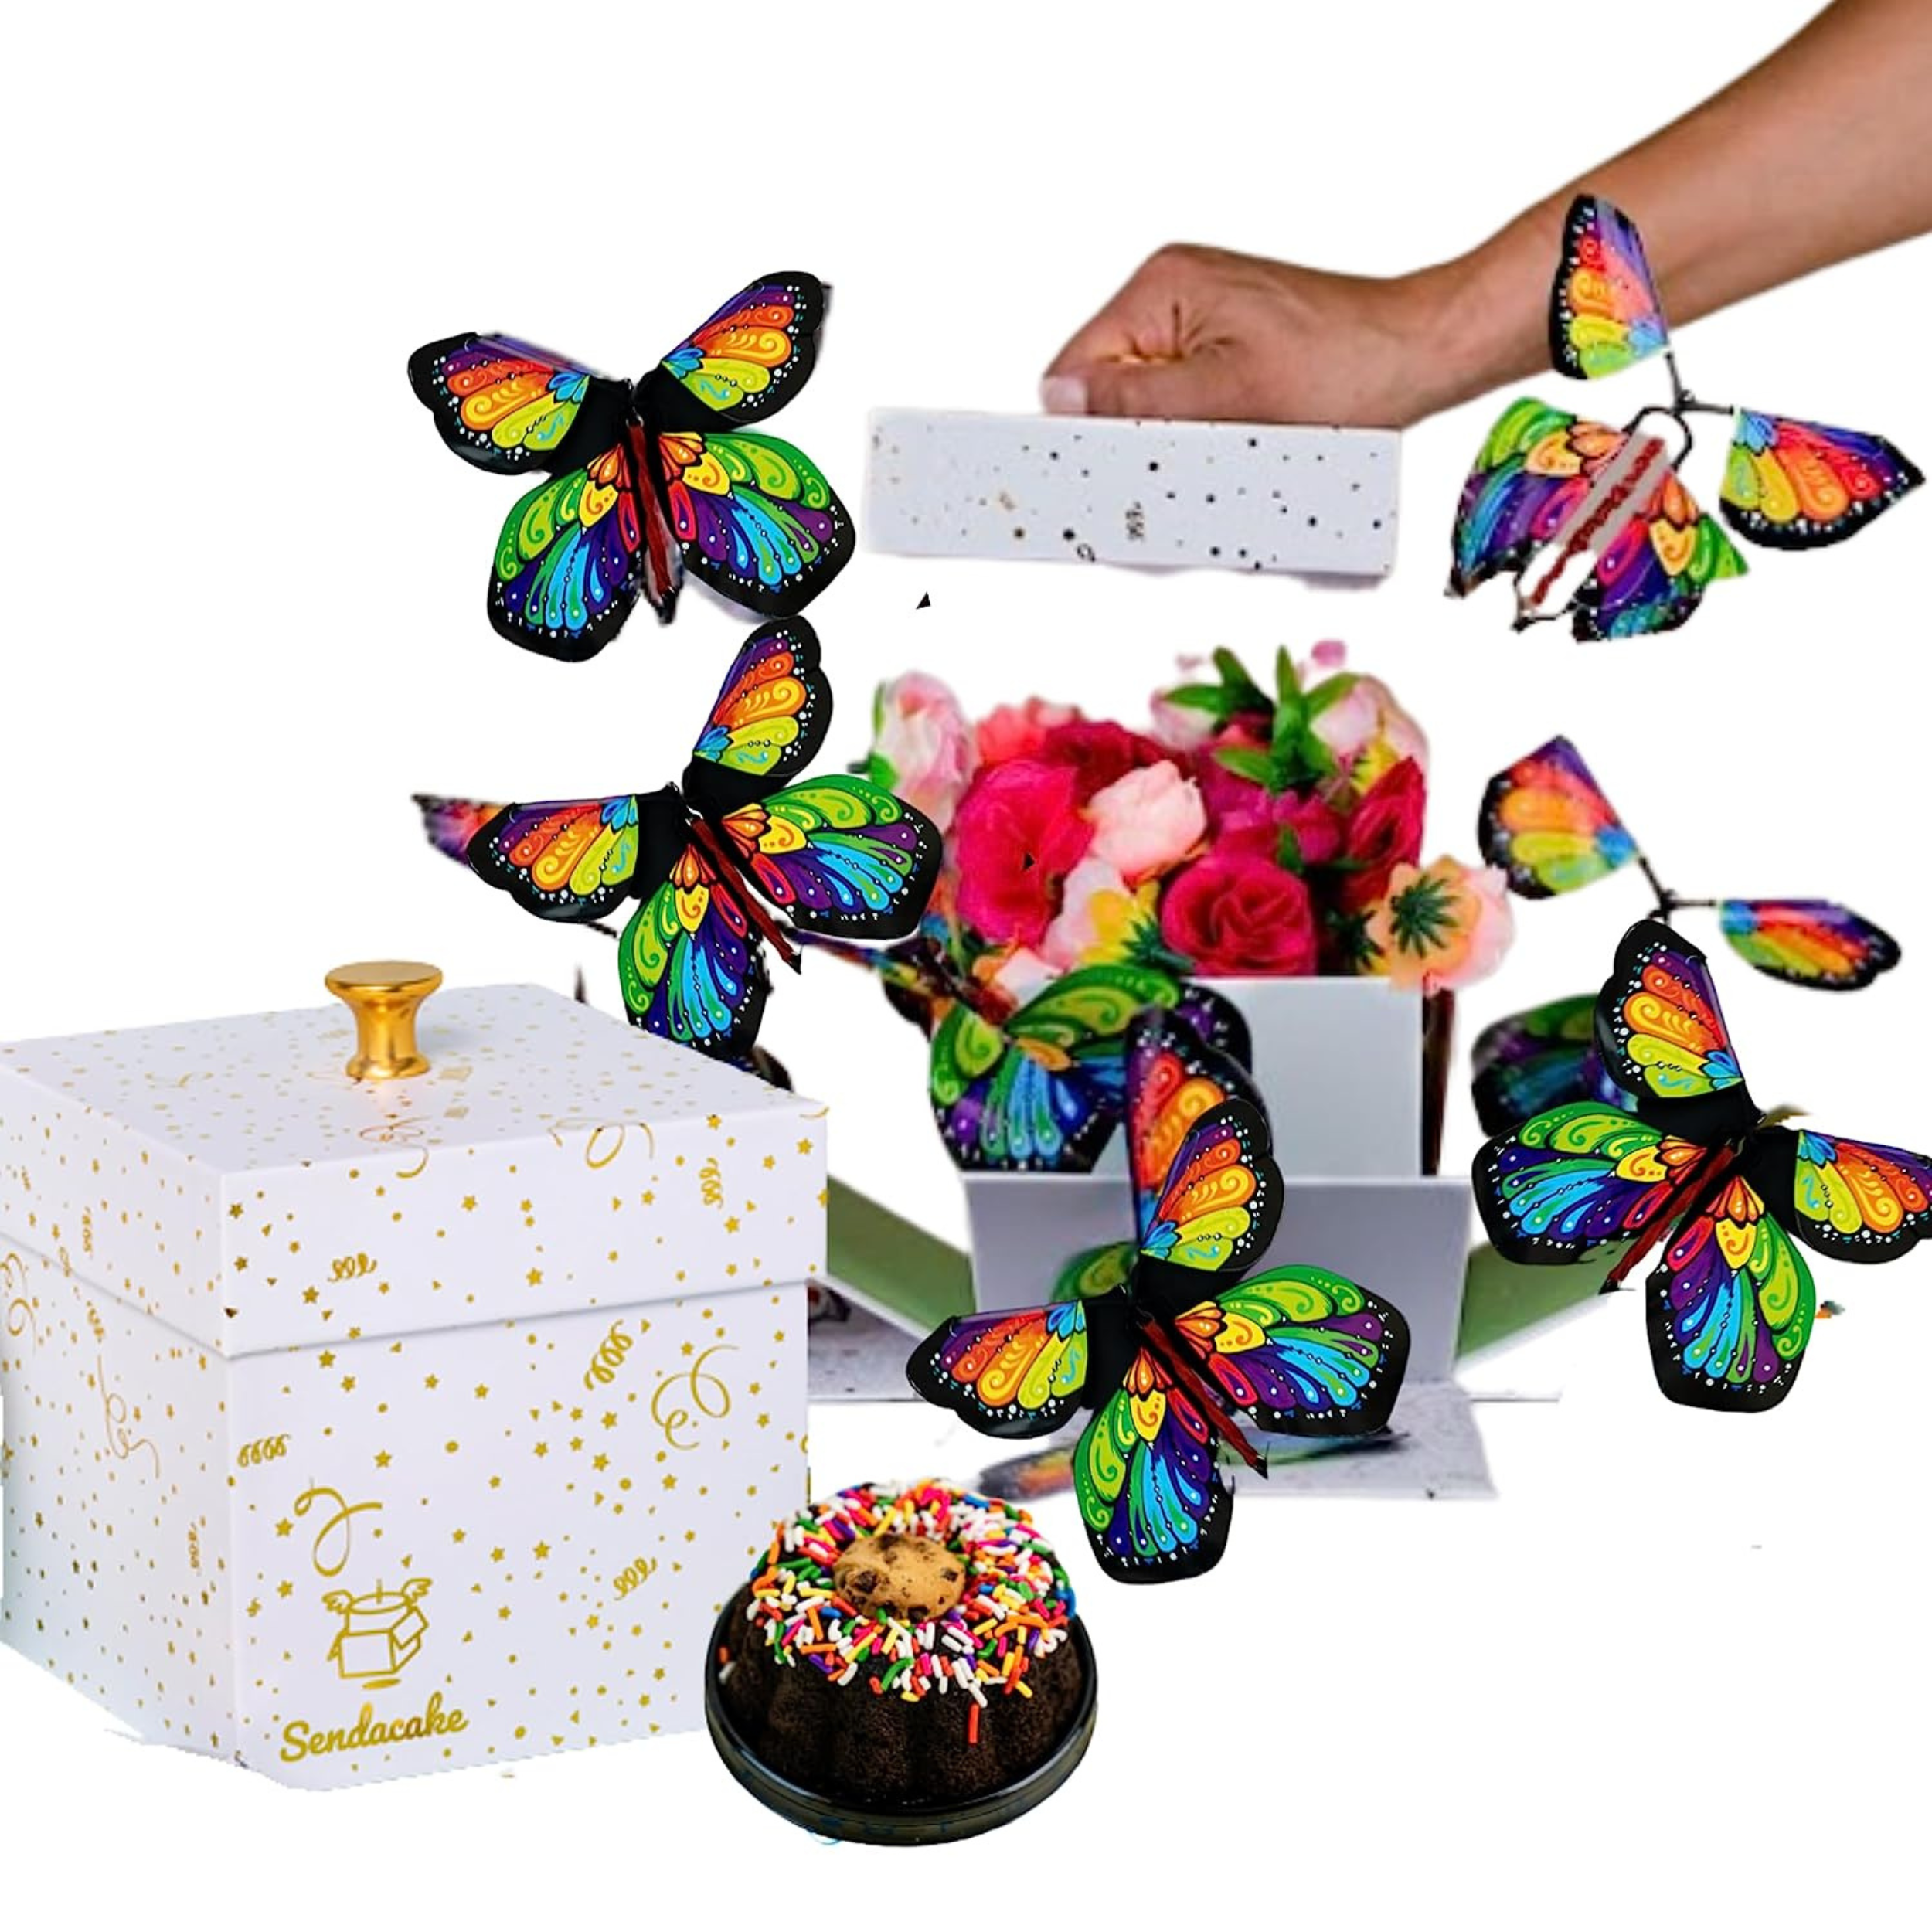 Magic Wind Up Flying Butterfly Surprise Box Great Playing Surprise Gift for Surprise Gift or Party Playing 50pcs, Size: One Size